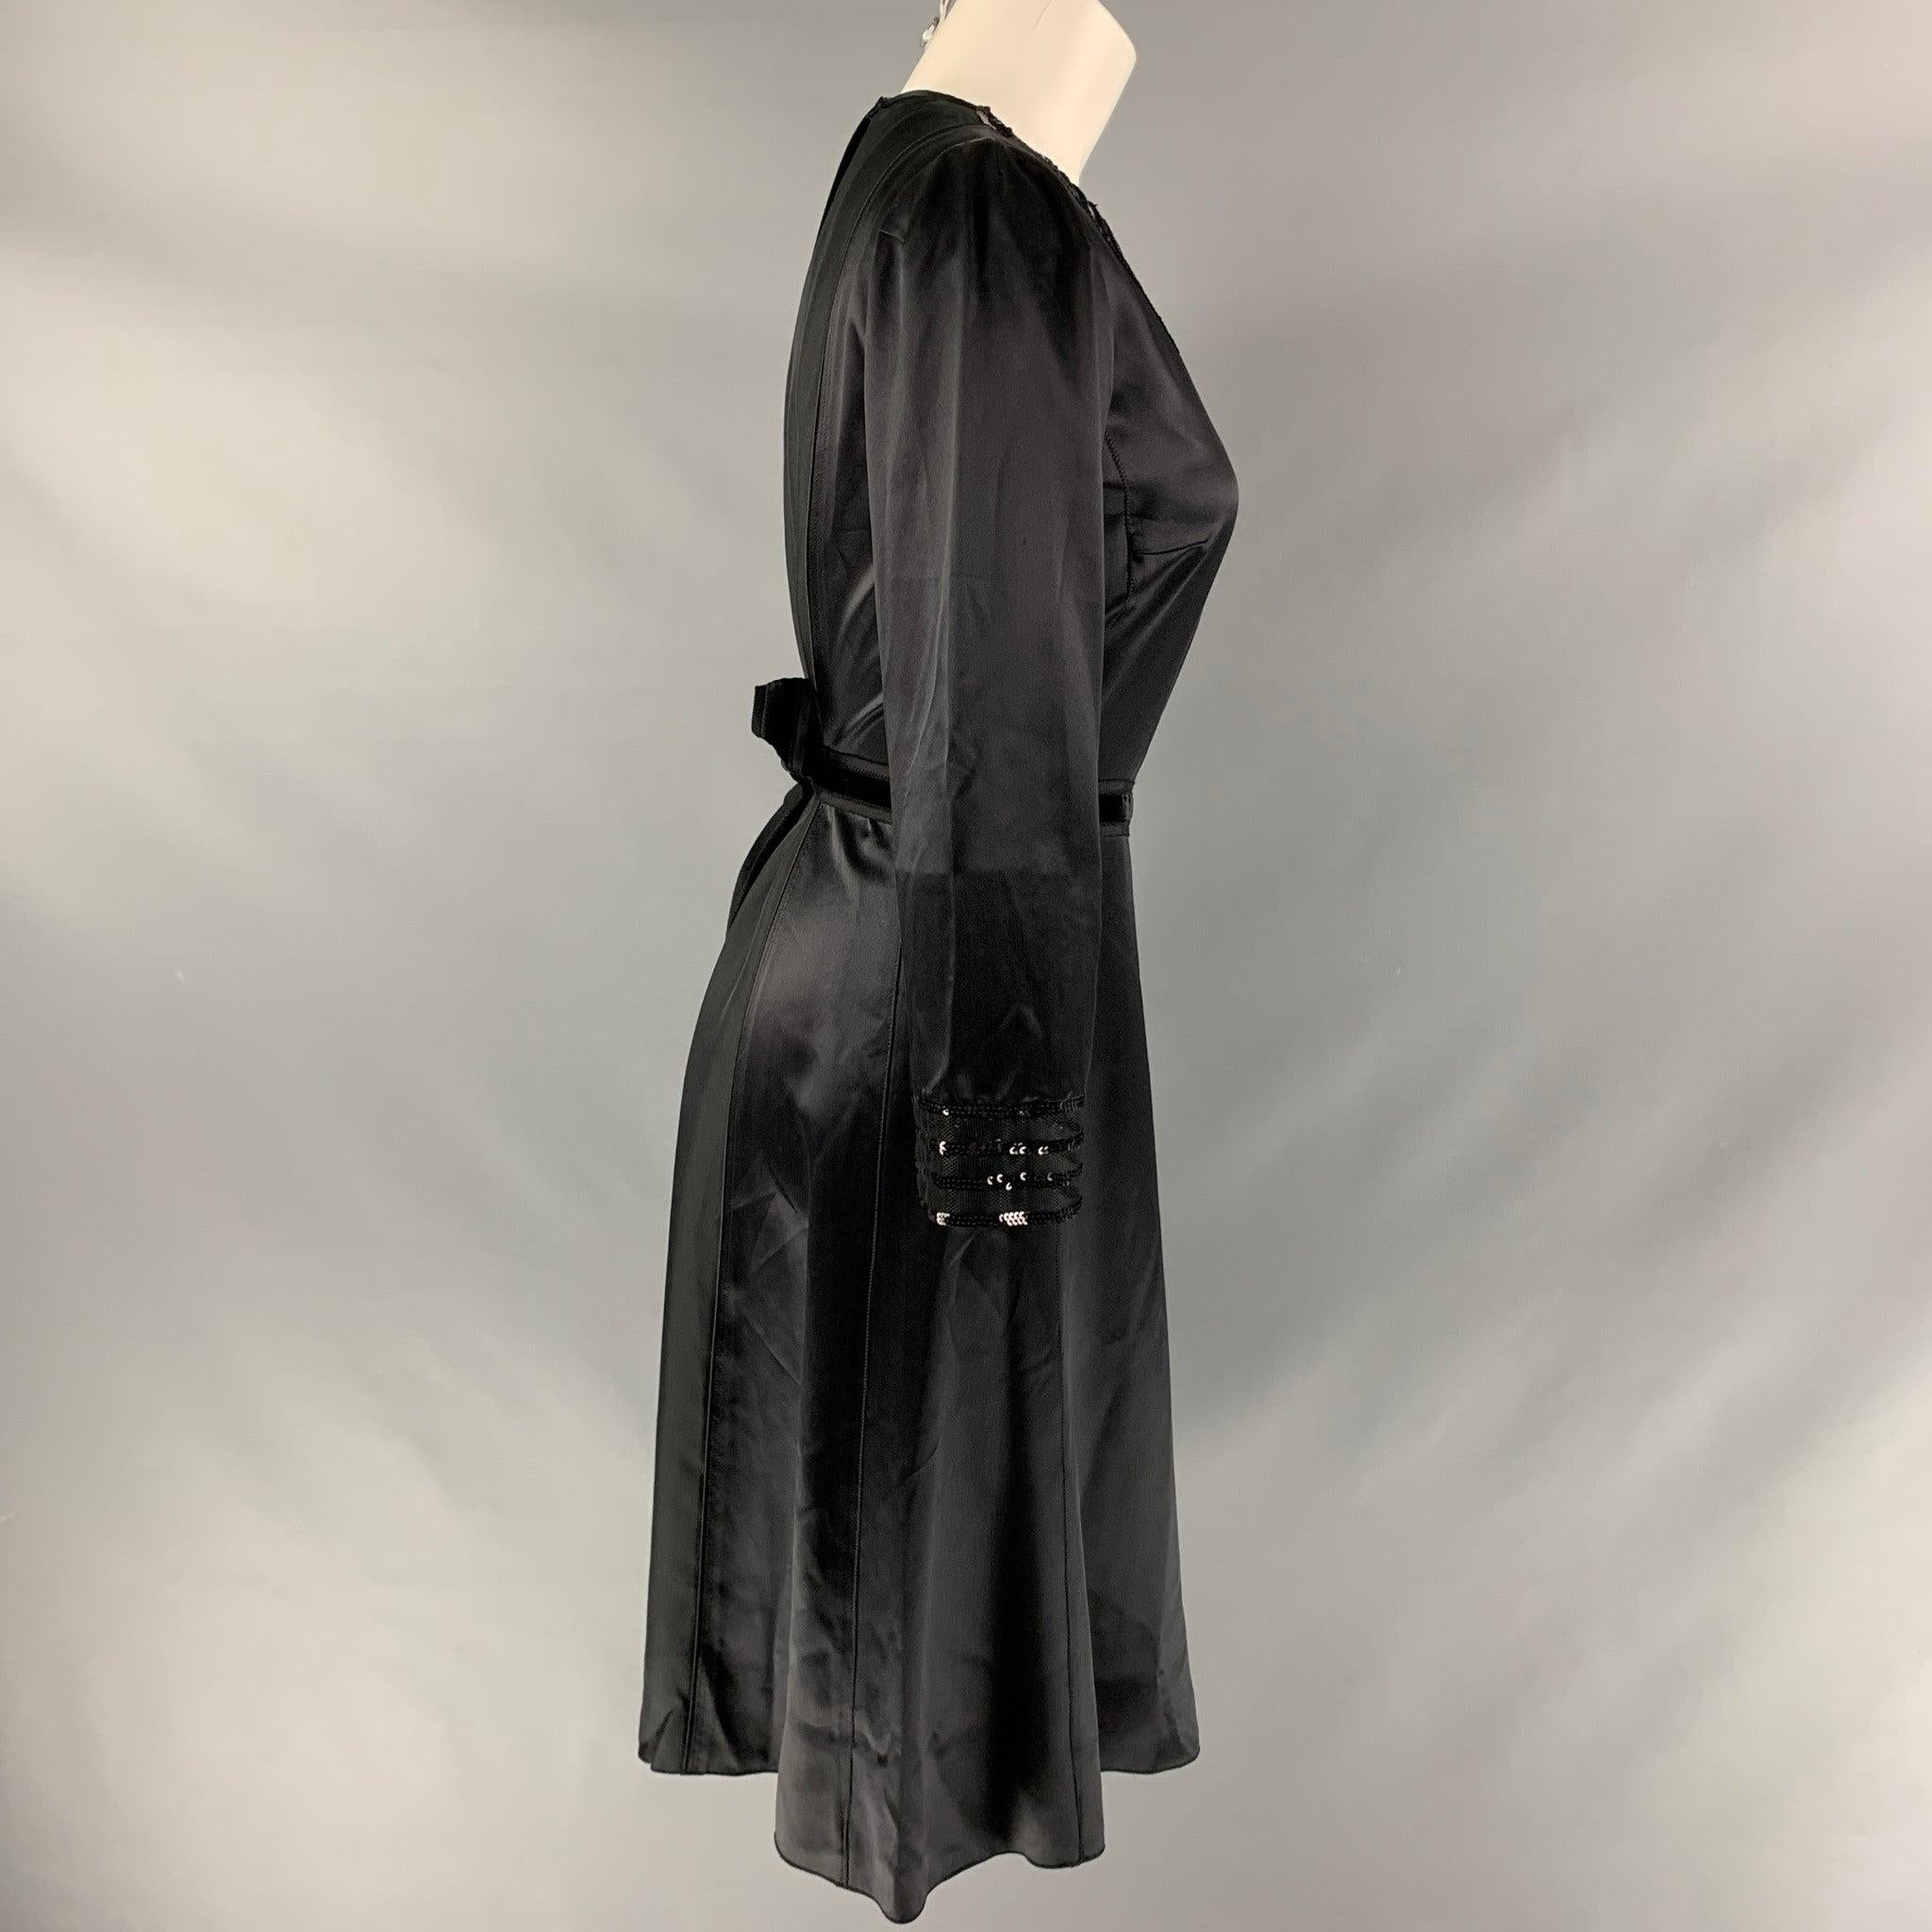 MARC JACOBS long sleeve dress comes in a black silk fabric featuring a tulle panel collar detail, sequin trims, back zip- up closure and velvet tie at back.Excellent Pre-Owned Condition. 

Marked:   4 

Measurements: 
 
Shoulder: 14 inches Bust: 32